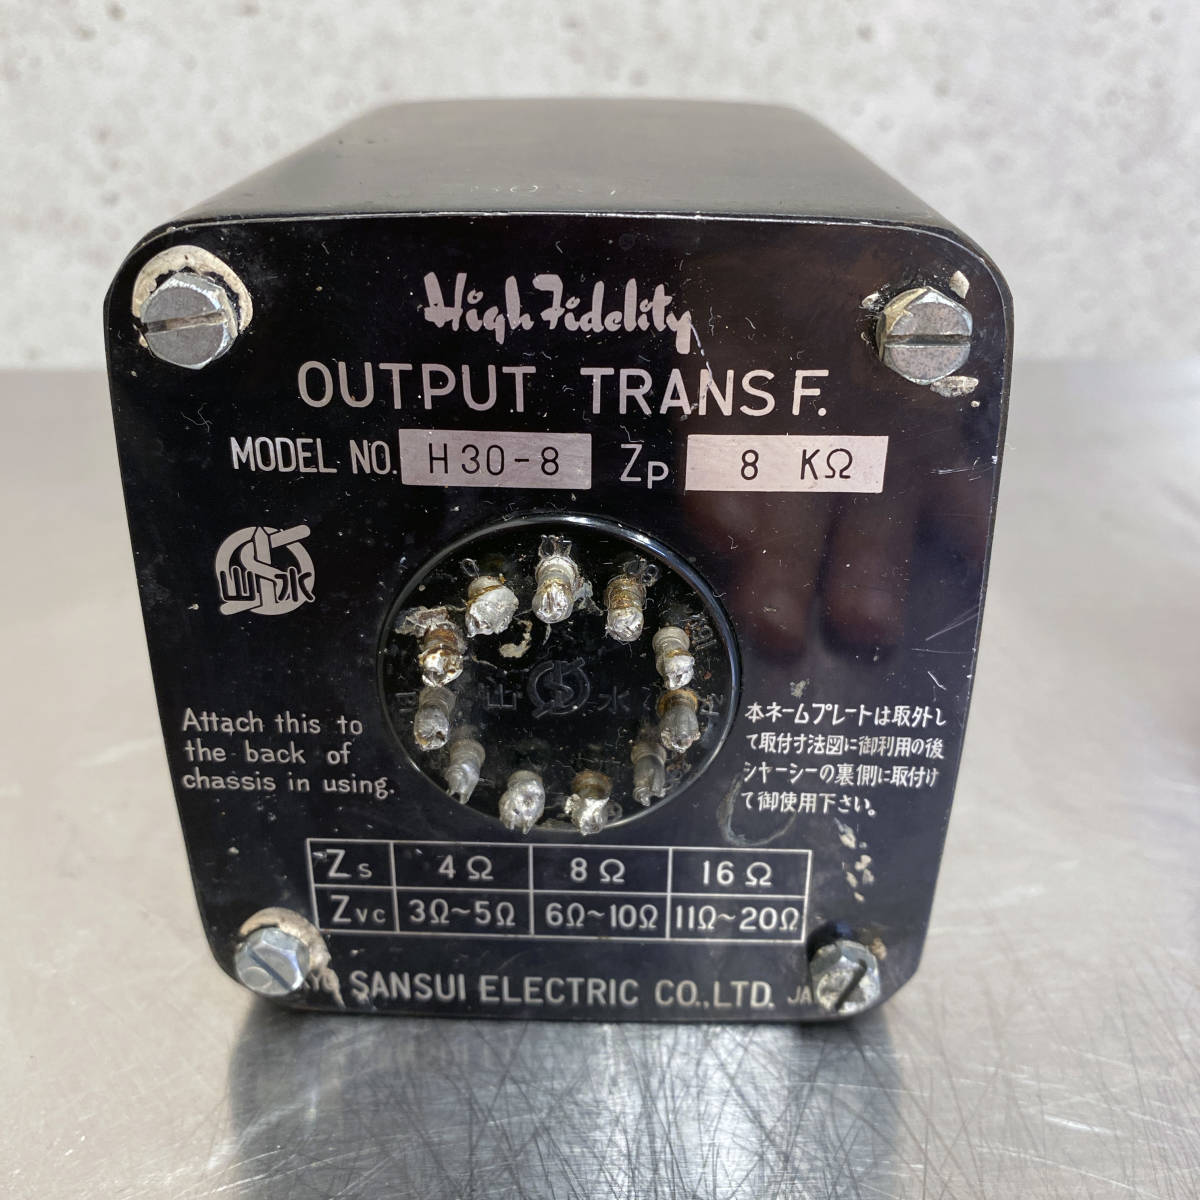 [ free shipping ] Sansui output trance H30-8 /Type L-60 tube amplifier long-term keeping goods Junk A607-3